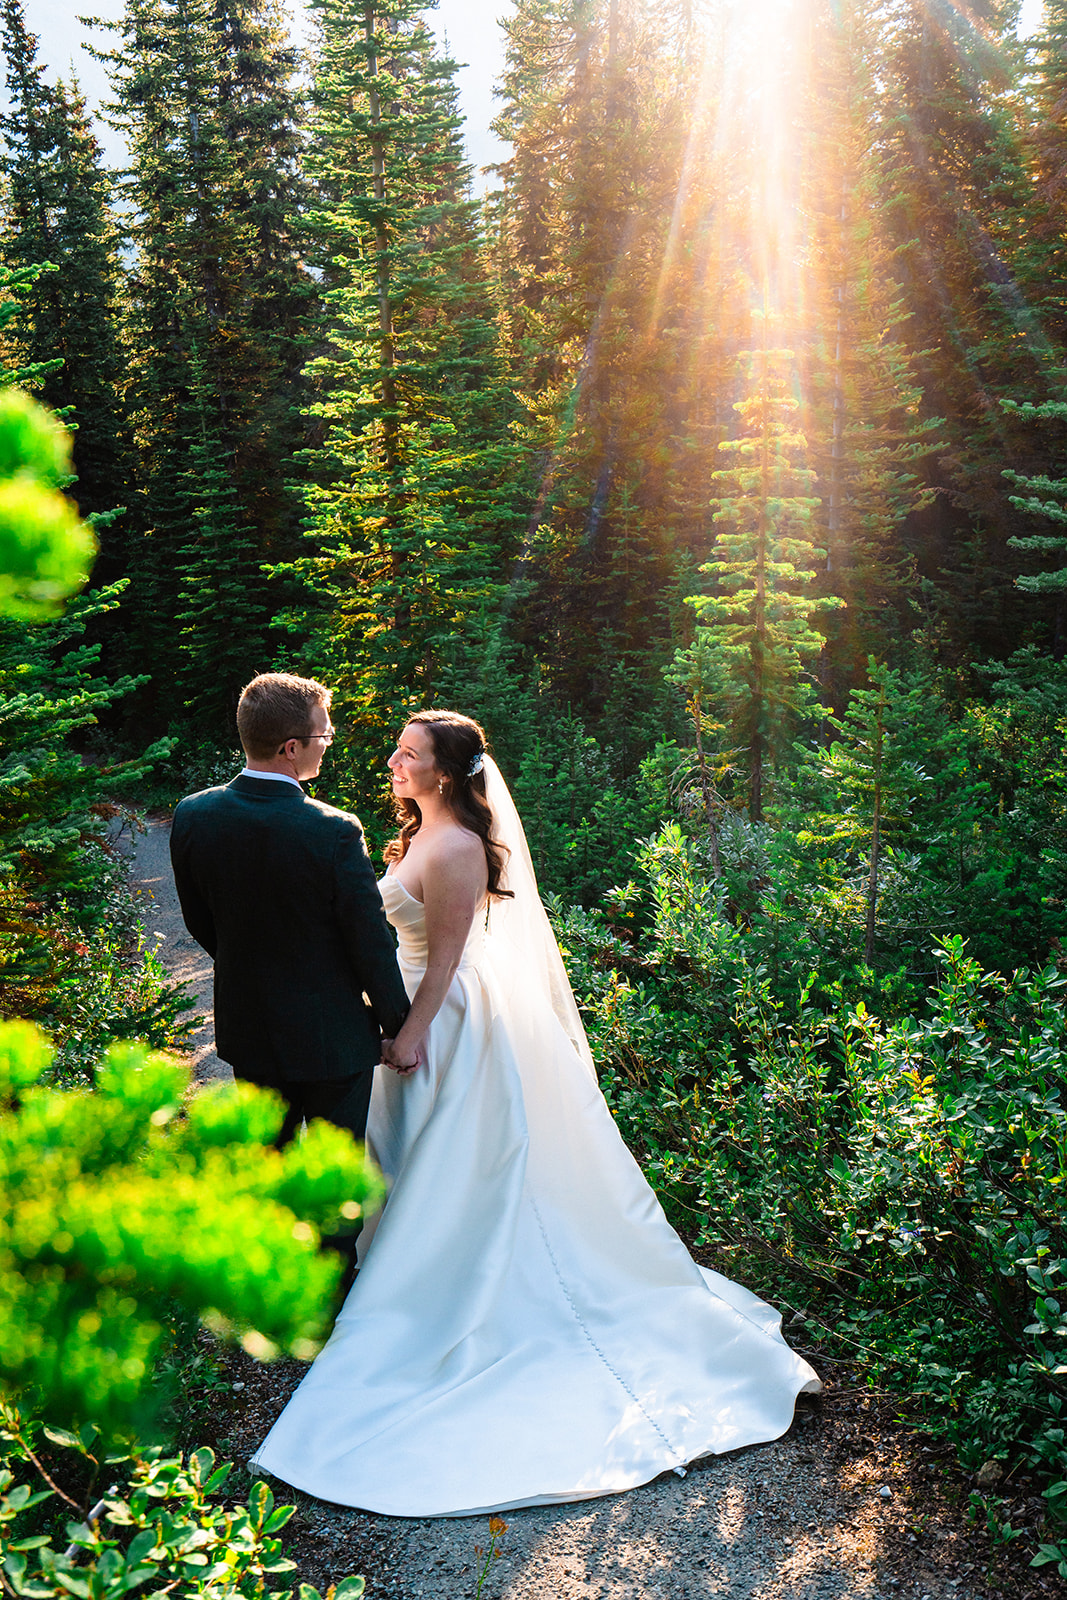 Bride and groom looking at one another endearingly in the forests of Banff